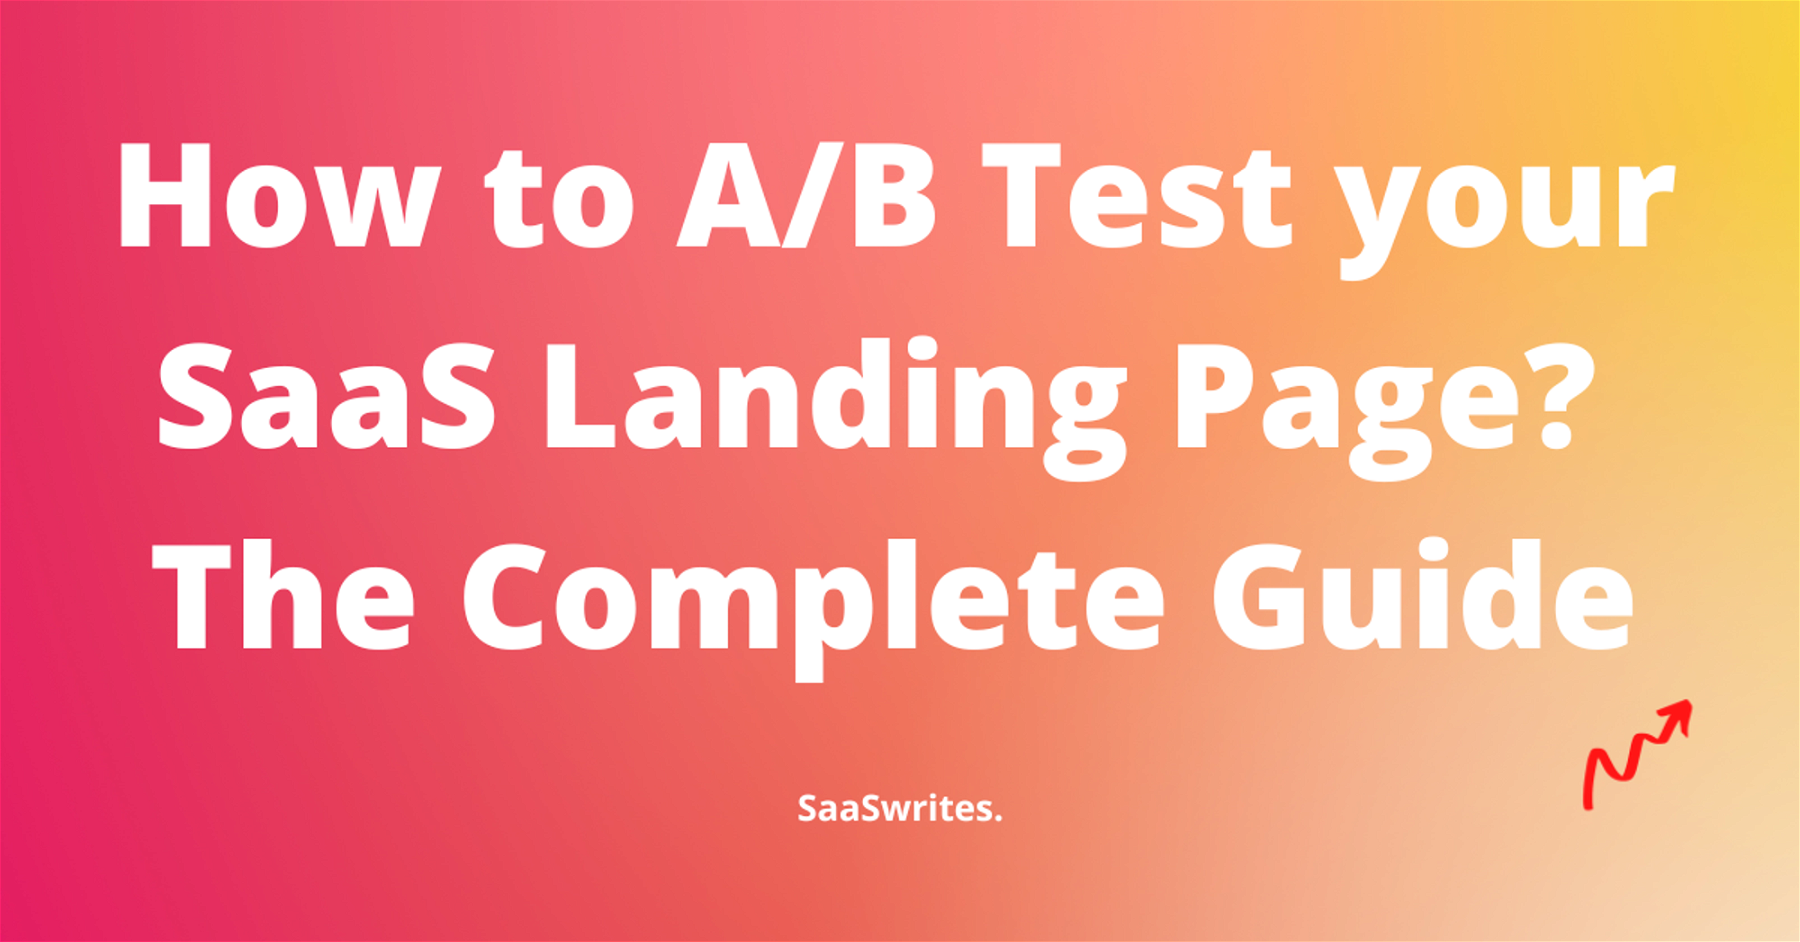 How to A/B Test your Landing Page? The Complete Expert Guide (2023)